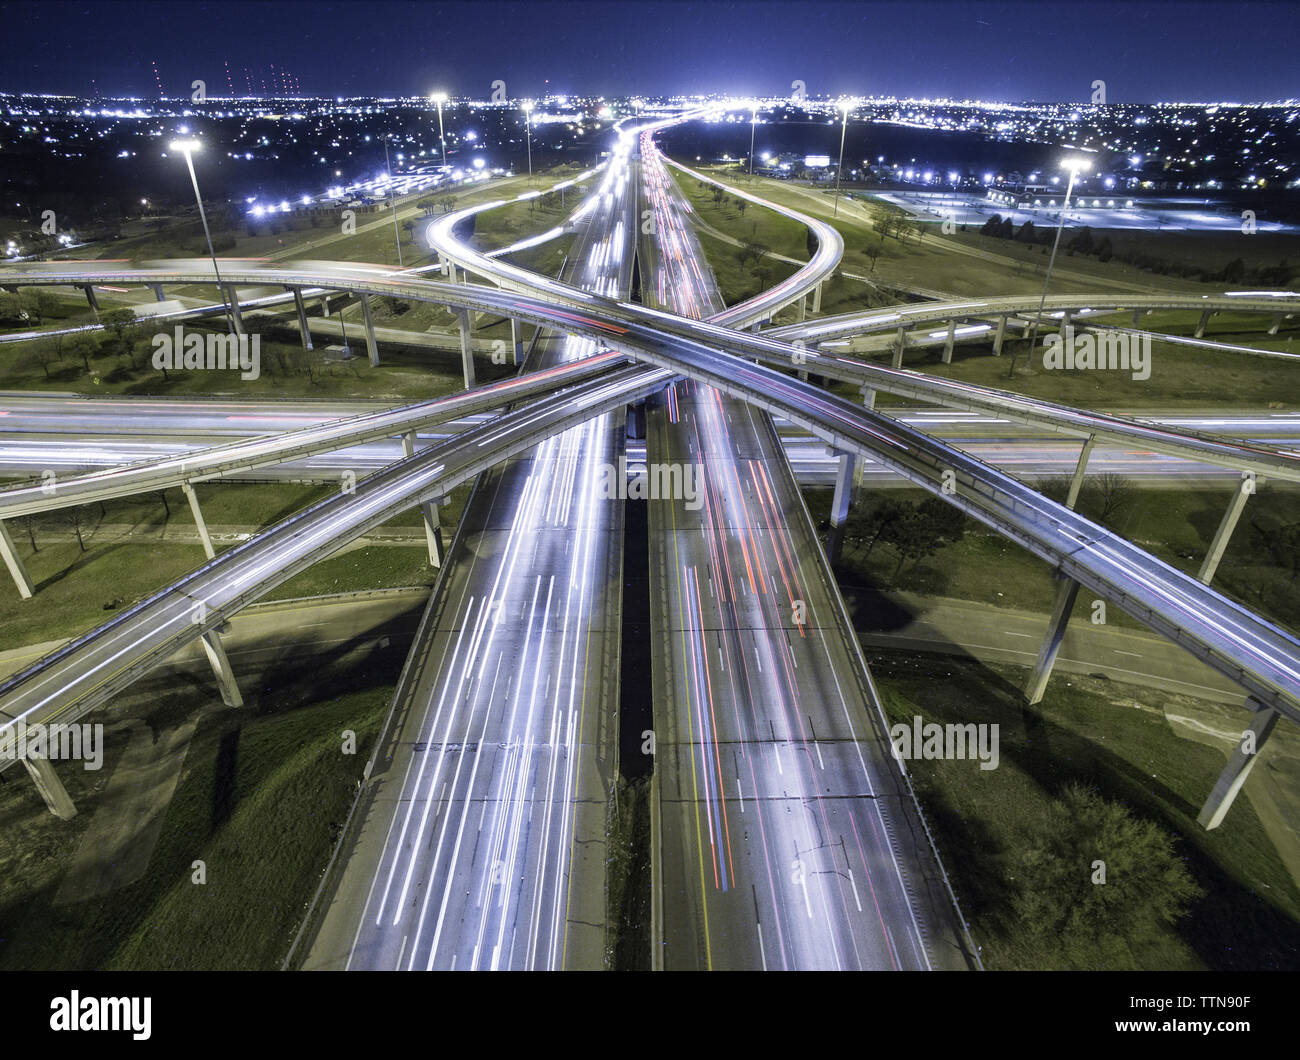 Aerial view of light trails on road intersections in illuminated city at night Stock Photo